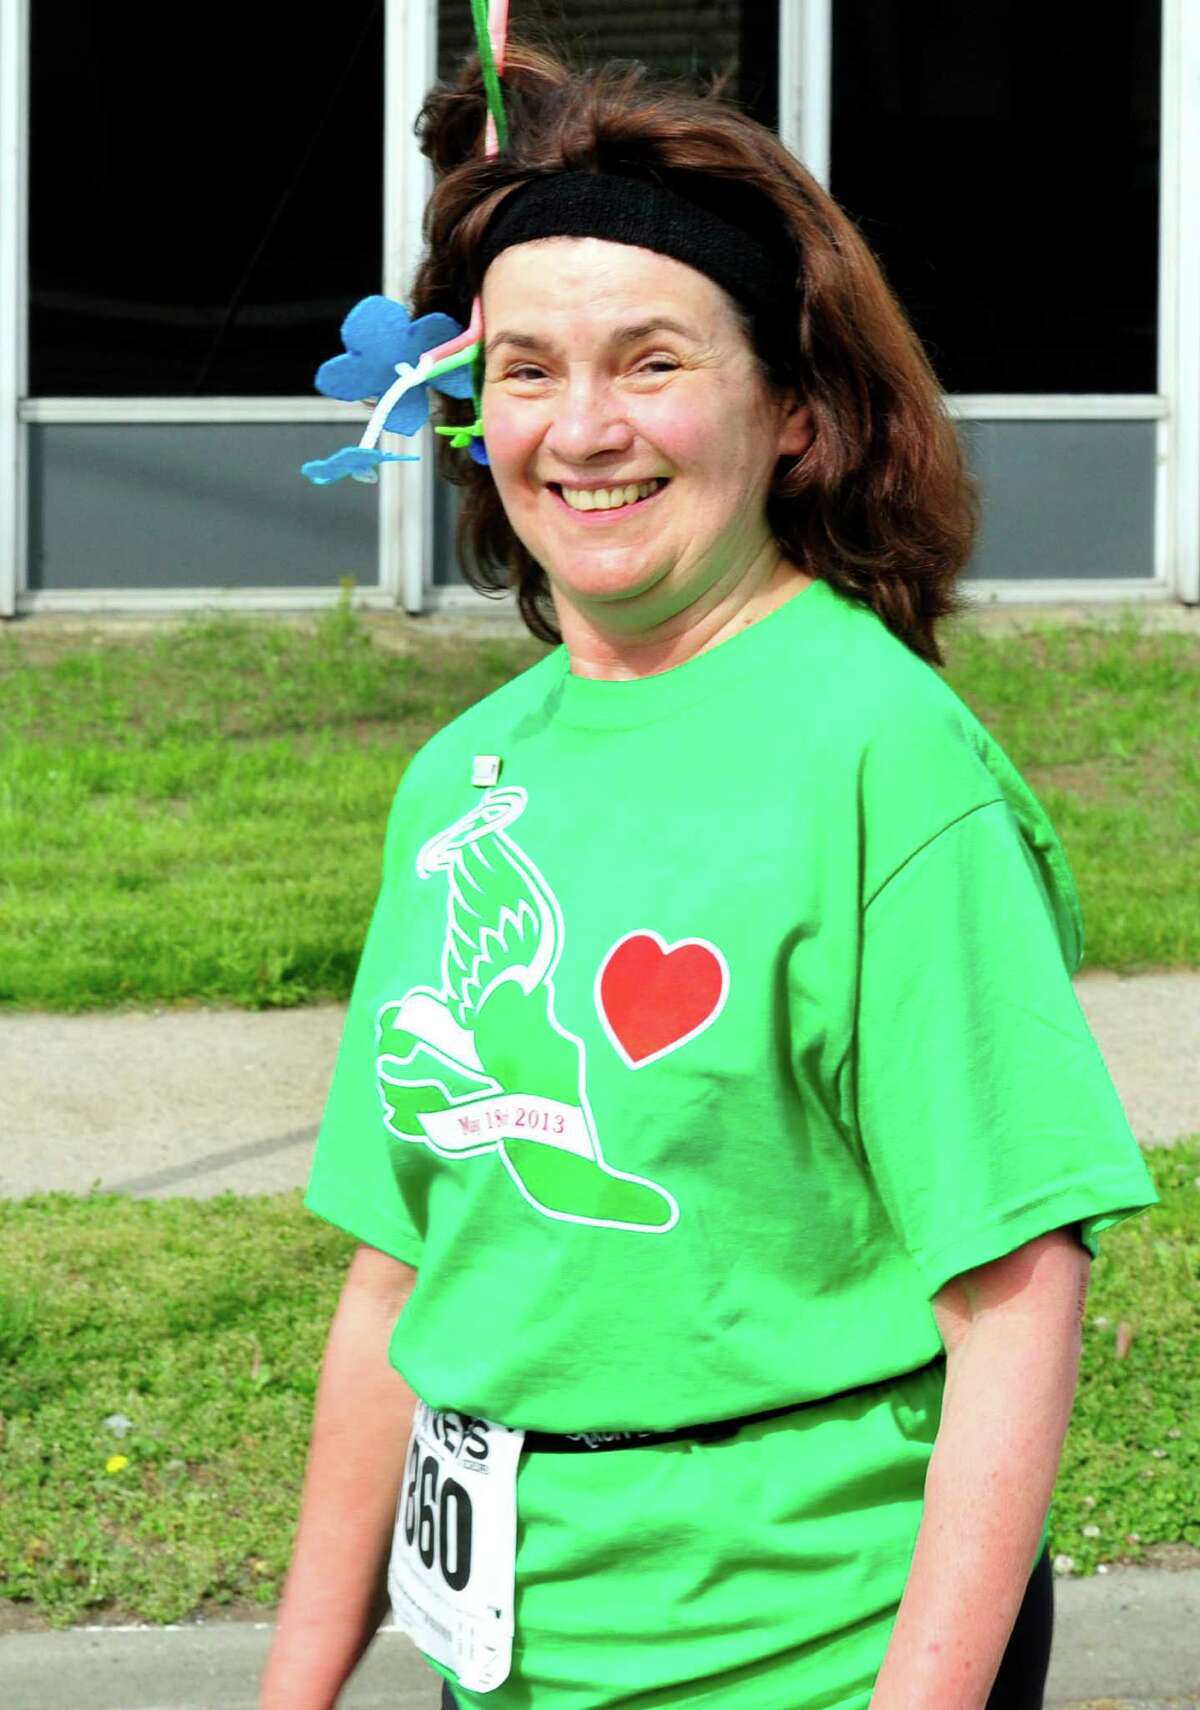 This is the Spring Forward 4 Sandy Hook 5K race held in Danbury, Conn. Saturday, May 18, 2013. The event raises money for scholarships in Dawn Hochsprung and Lauren Rousseau's memory. Both were killed in the Sandy Hook Elementry School tragedy.